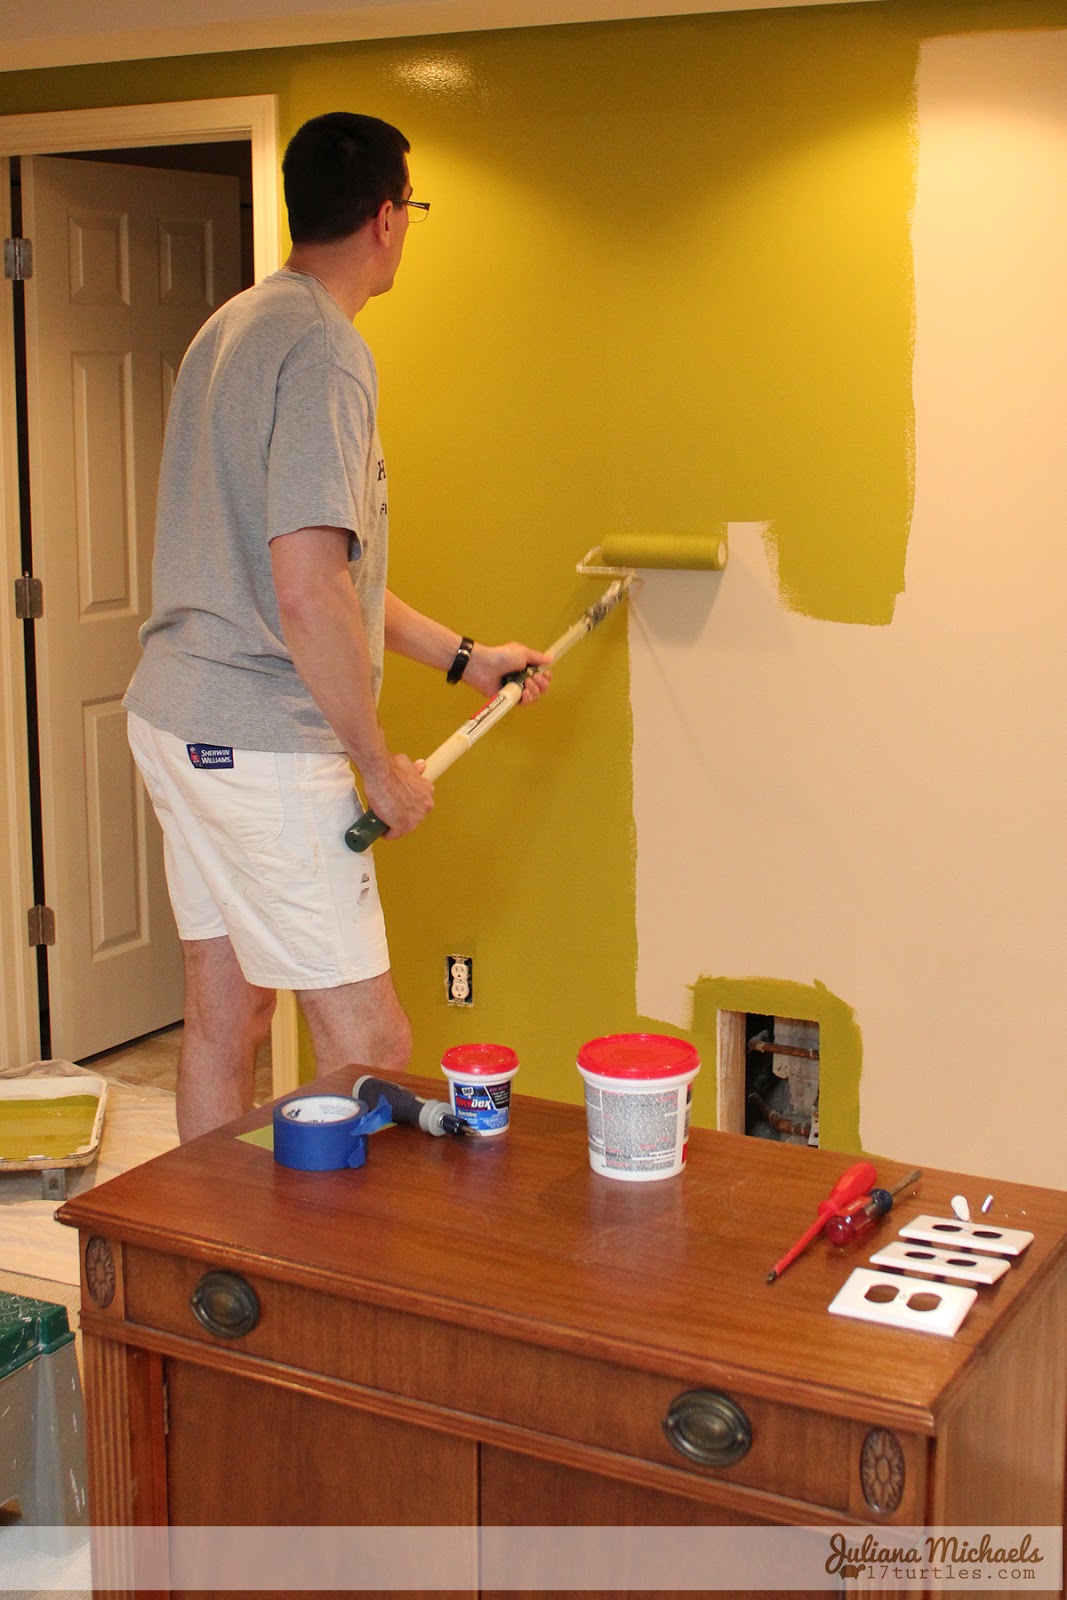 Juliana Michaels Scrapbook Room Makeover During Painting The Walls #sprizoflime